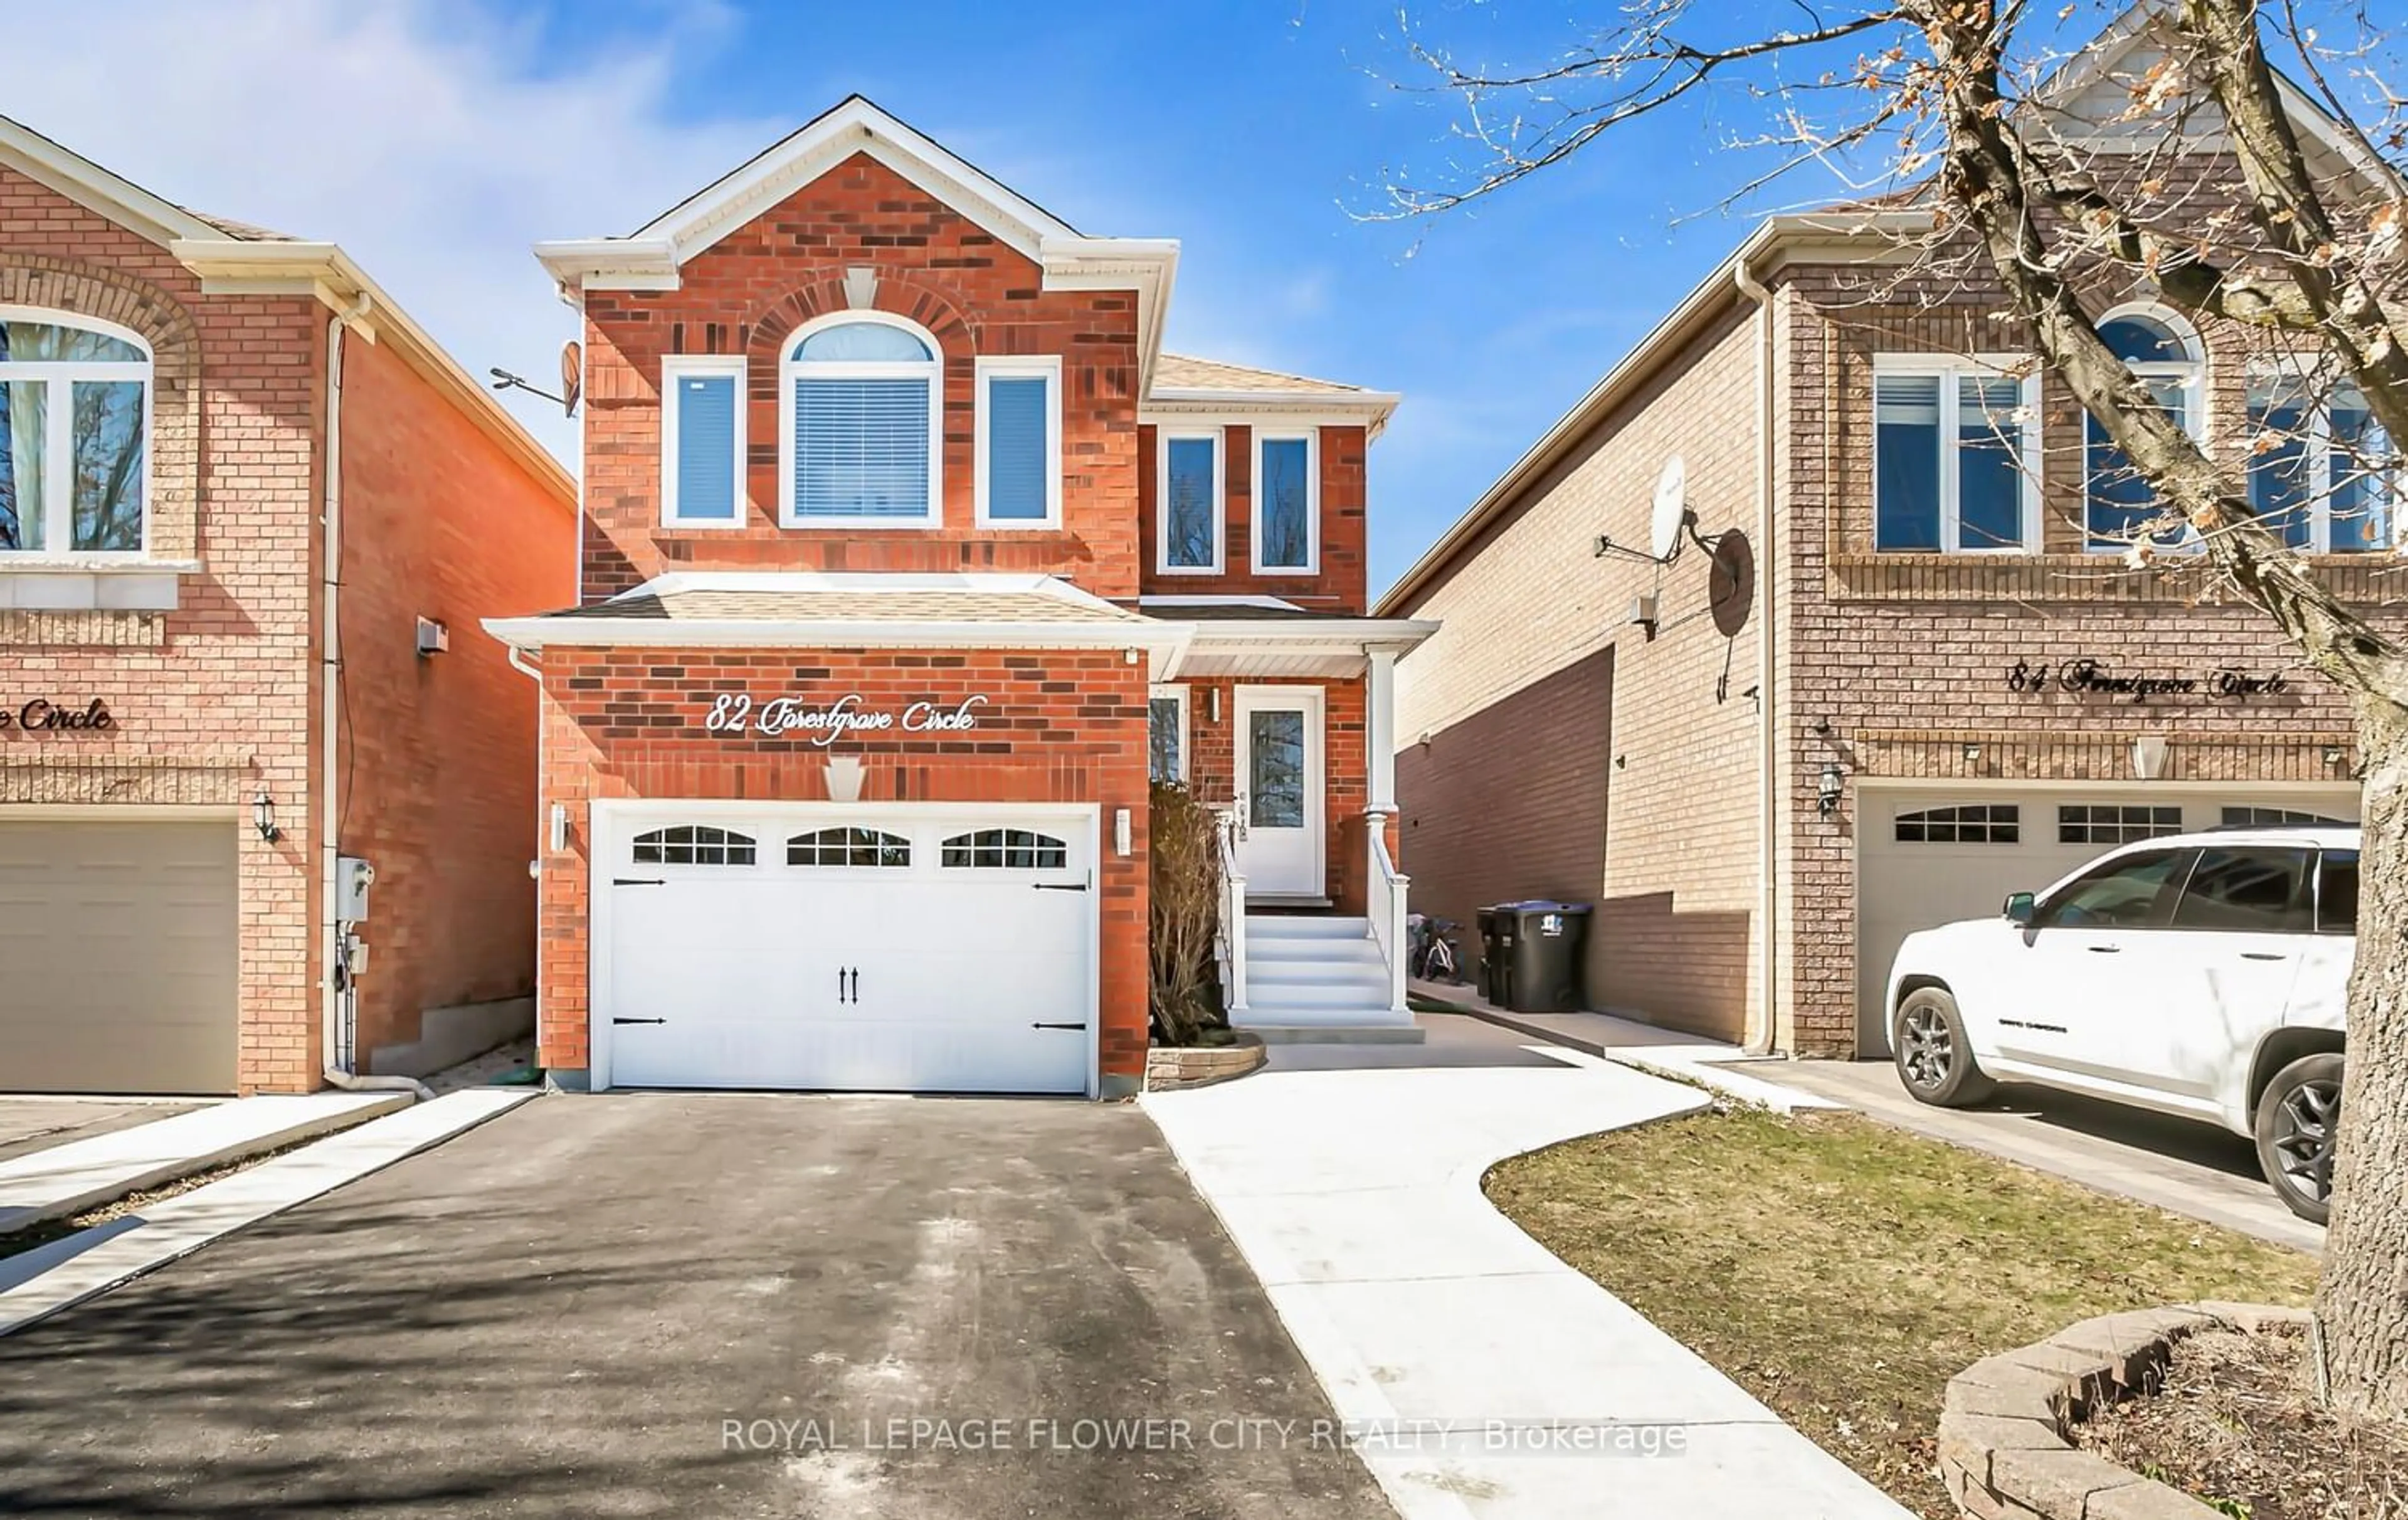 Home with brick exterior material for 82 Forestgrove Circ, Brampton Ontario L6Z 4T5